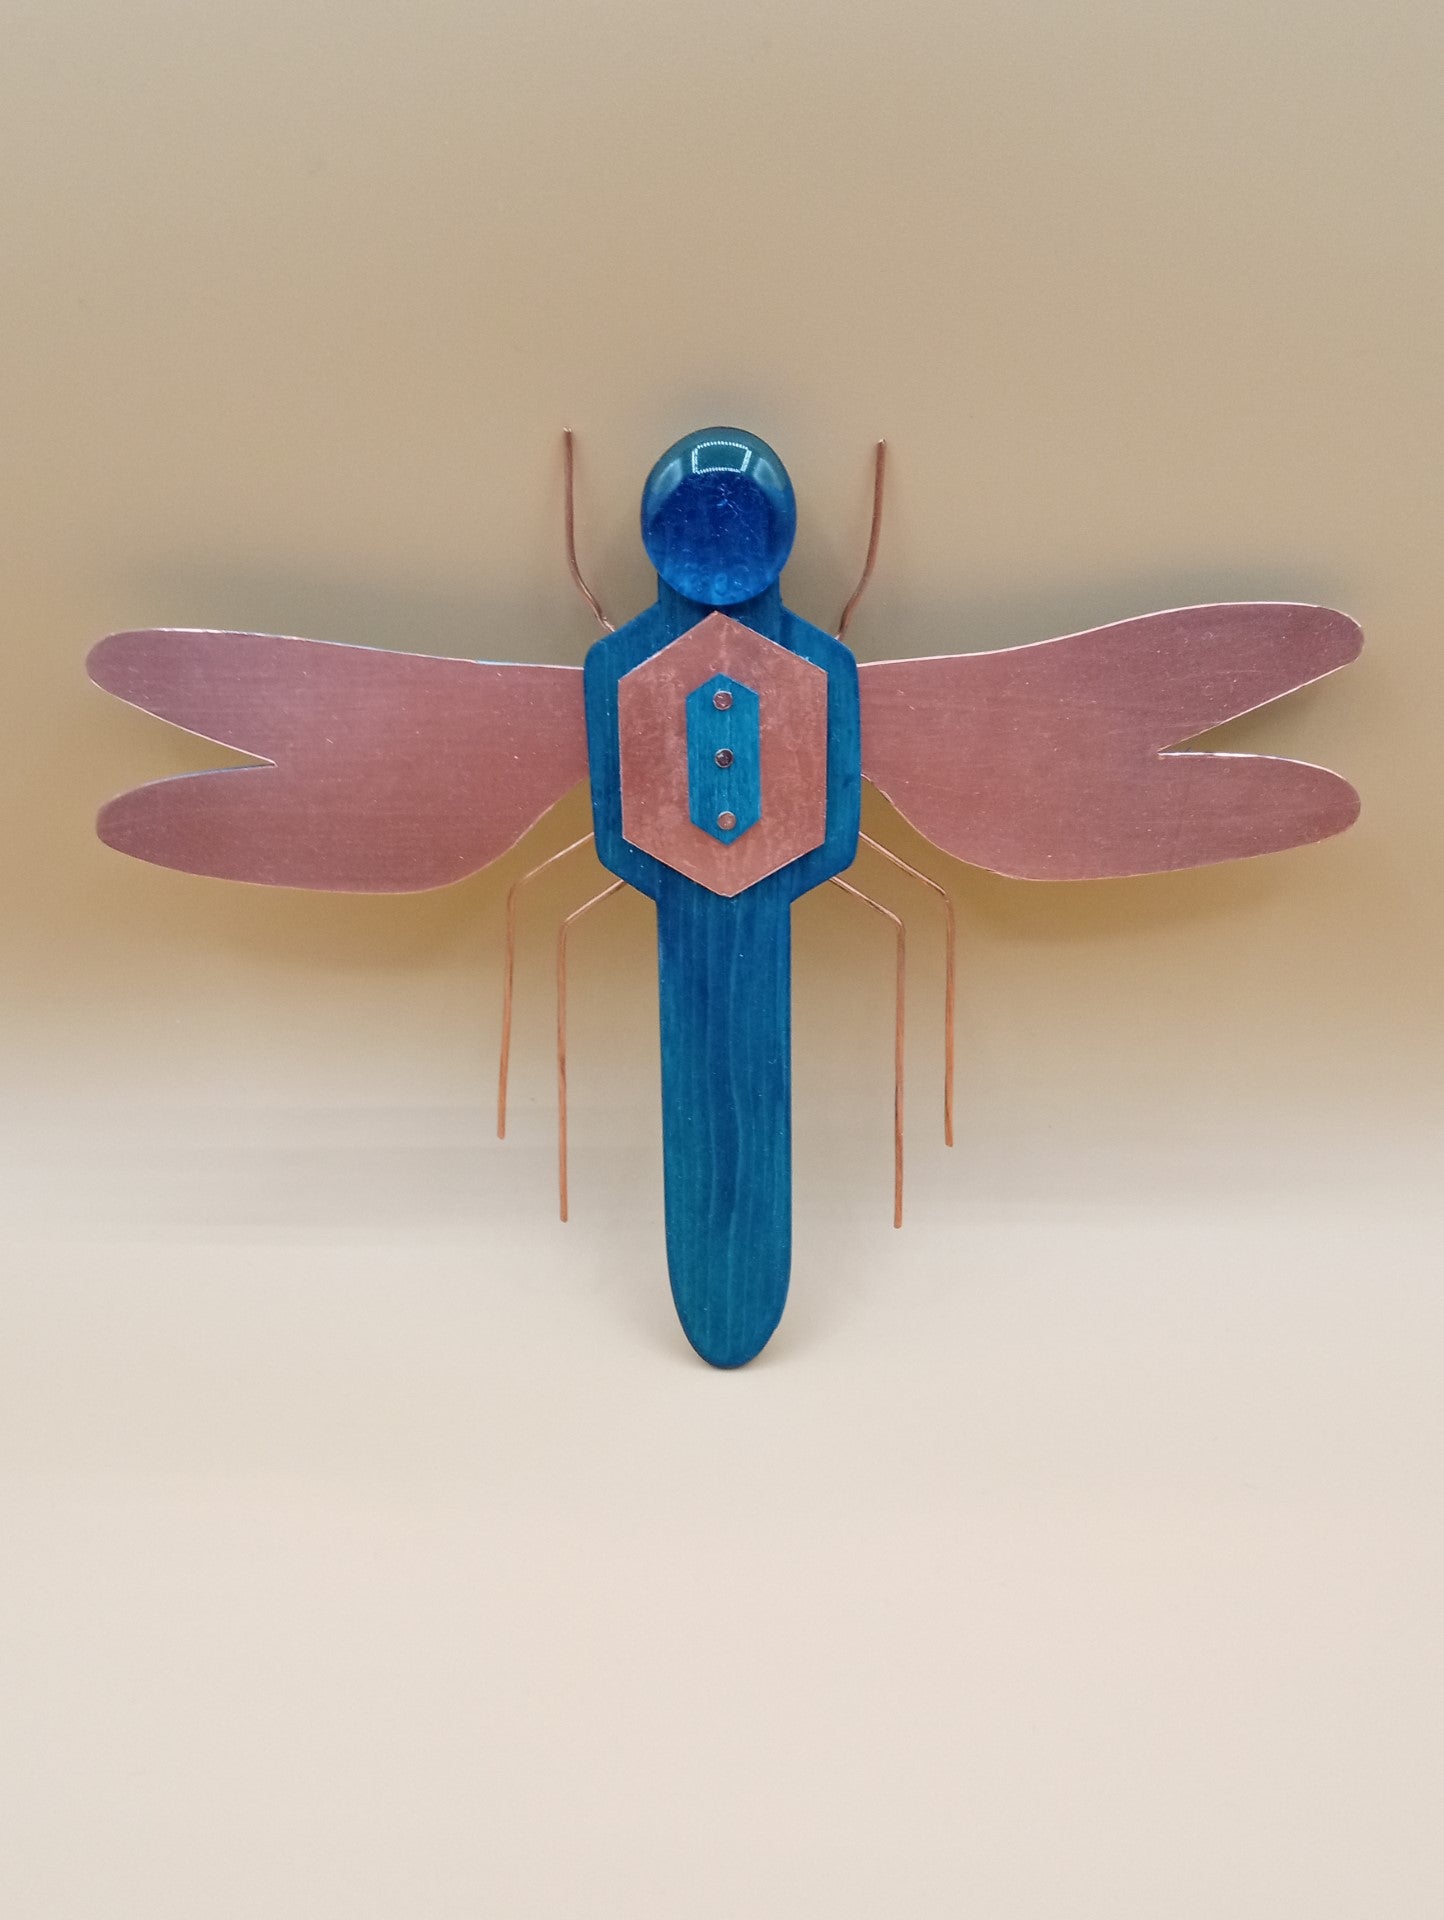 Blue wood body  Hand cut copper sheet makes up the wings  Copper wire legs  Blue Glass Stone head .  Blue wood body  Hand cut copper sheet makes up the wings  Copper wire legs  Blue Glass Stone head  9.5" long x  8" wide x  1" high  Wonderful year around decoration  Great for any insect enthusiast